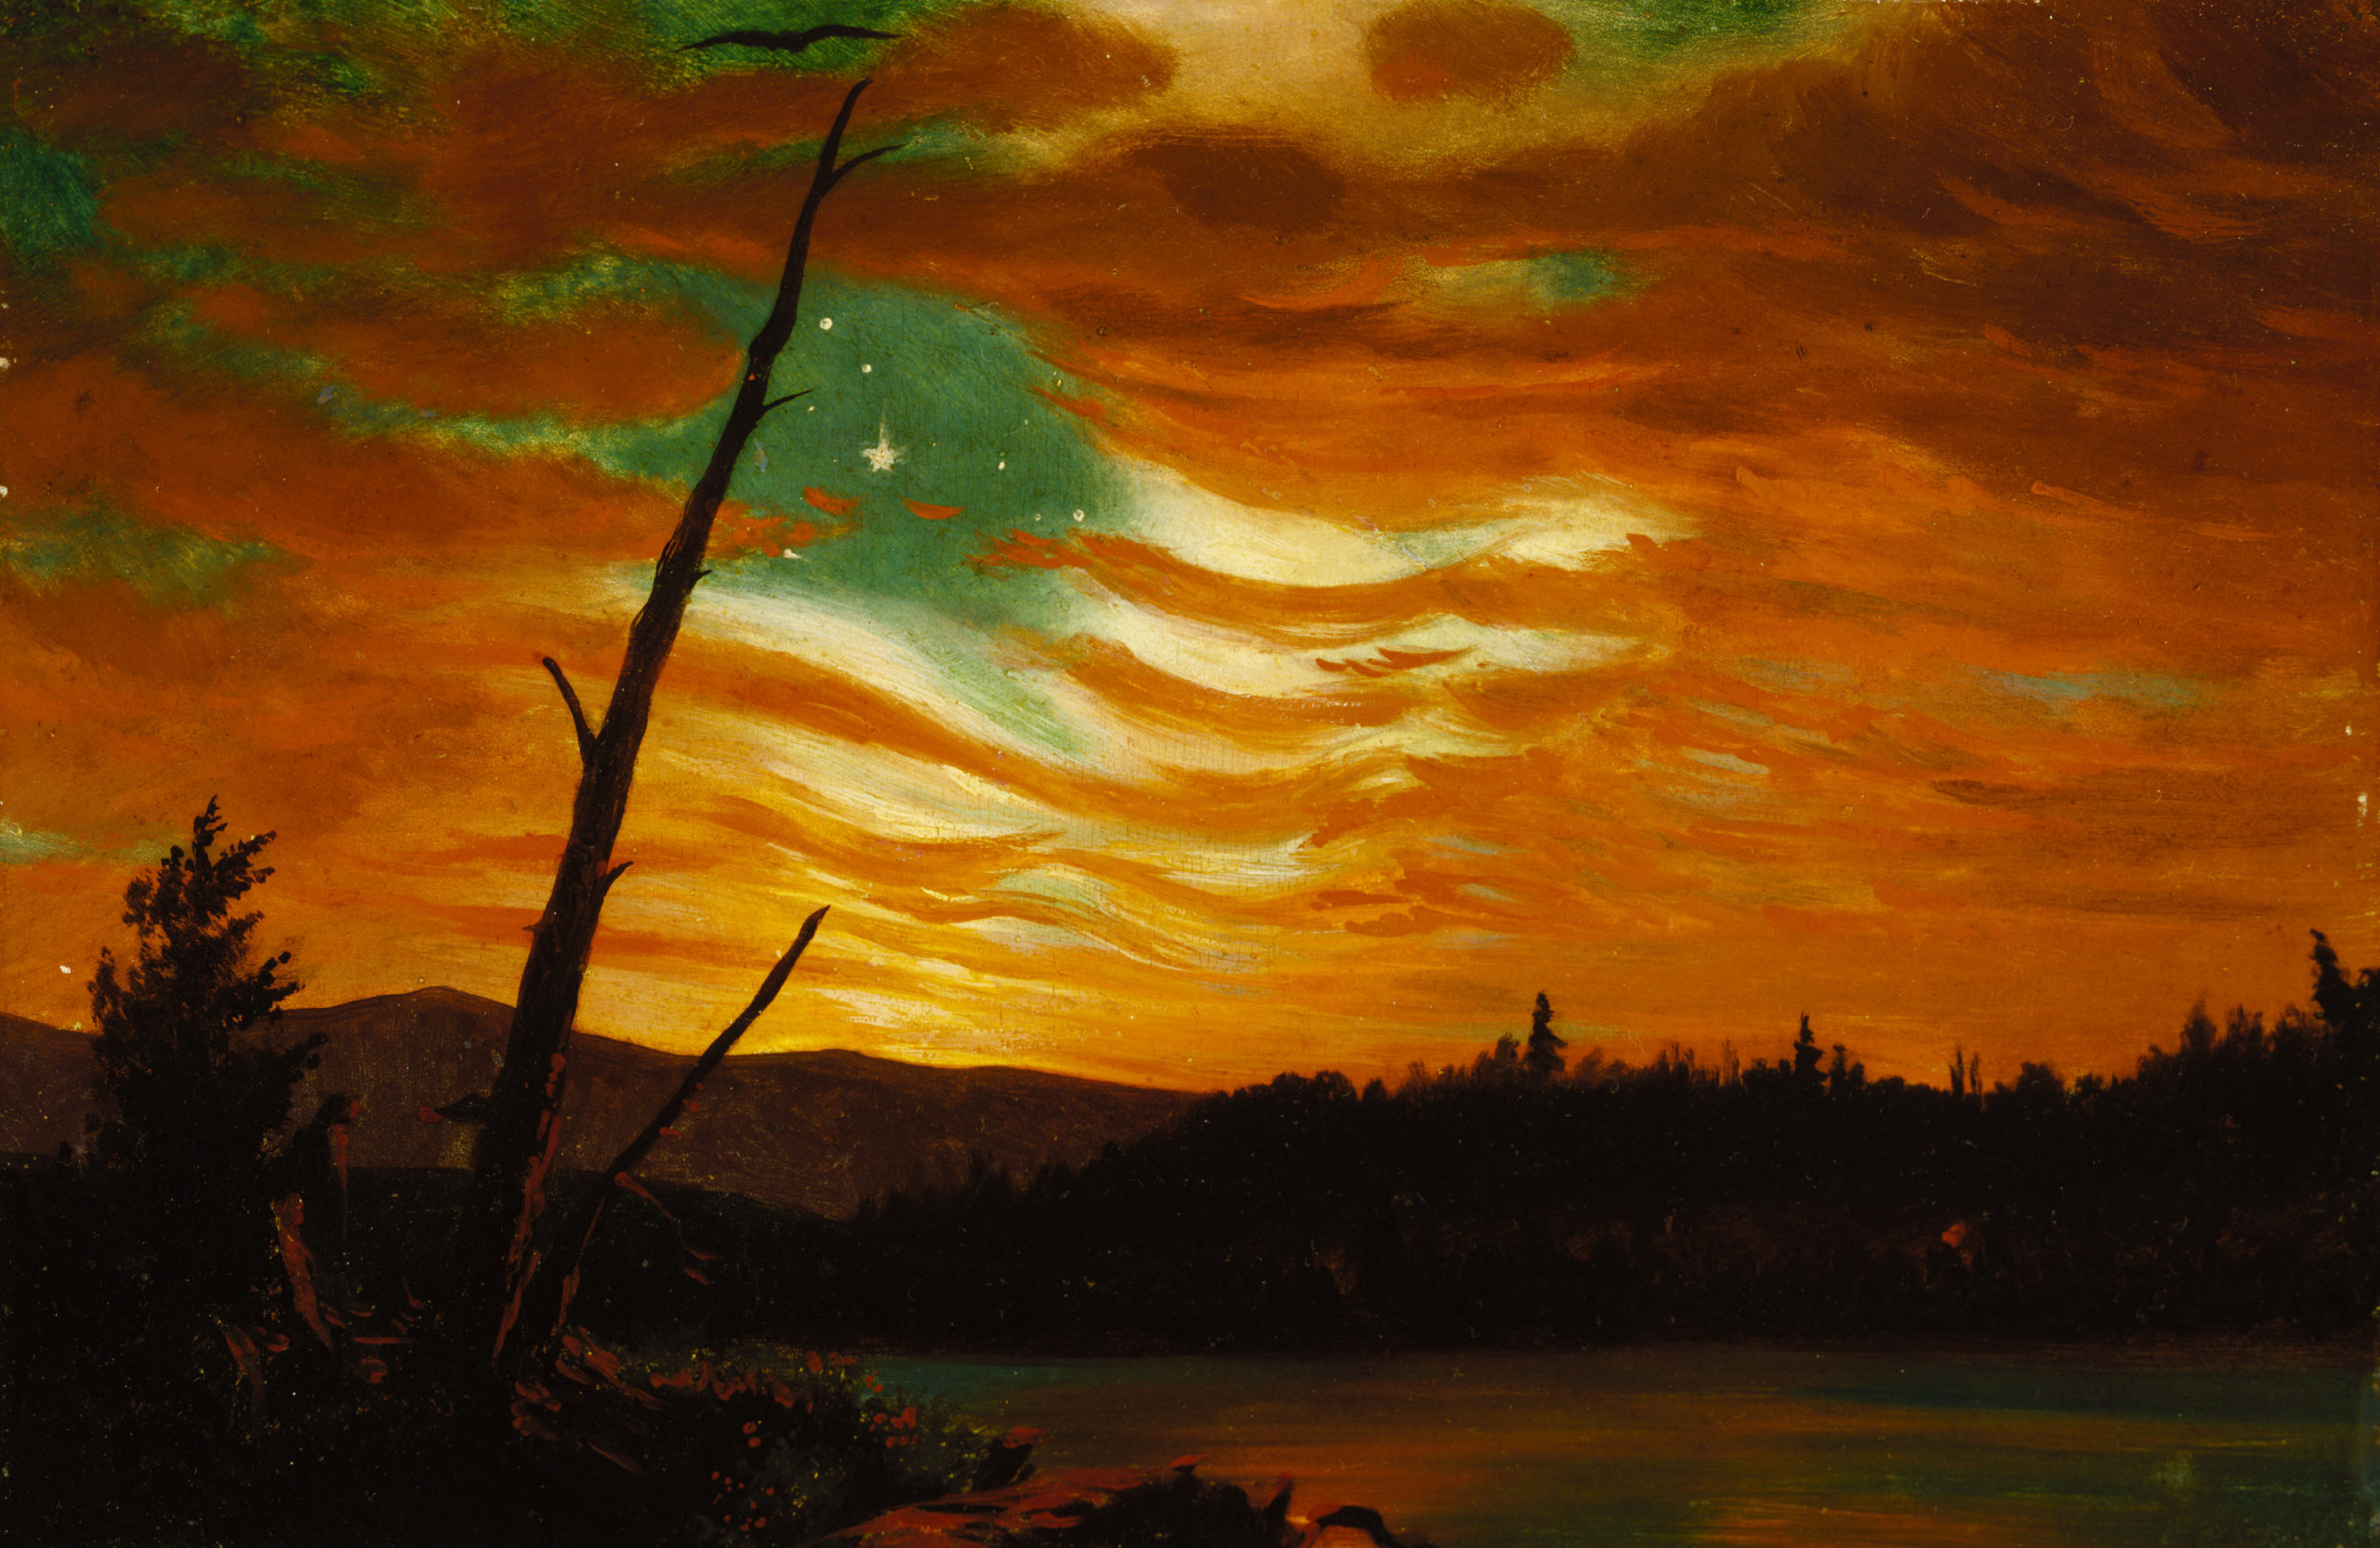 Frederic Edwin Church, Our Banner in the Sky, 1861, oil paint over photomechanically produced lithograph, 7 1/2 x 11 3/8 inches (Terra Foundation for American Art)